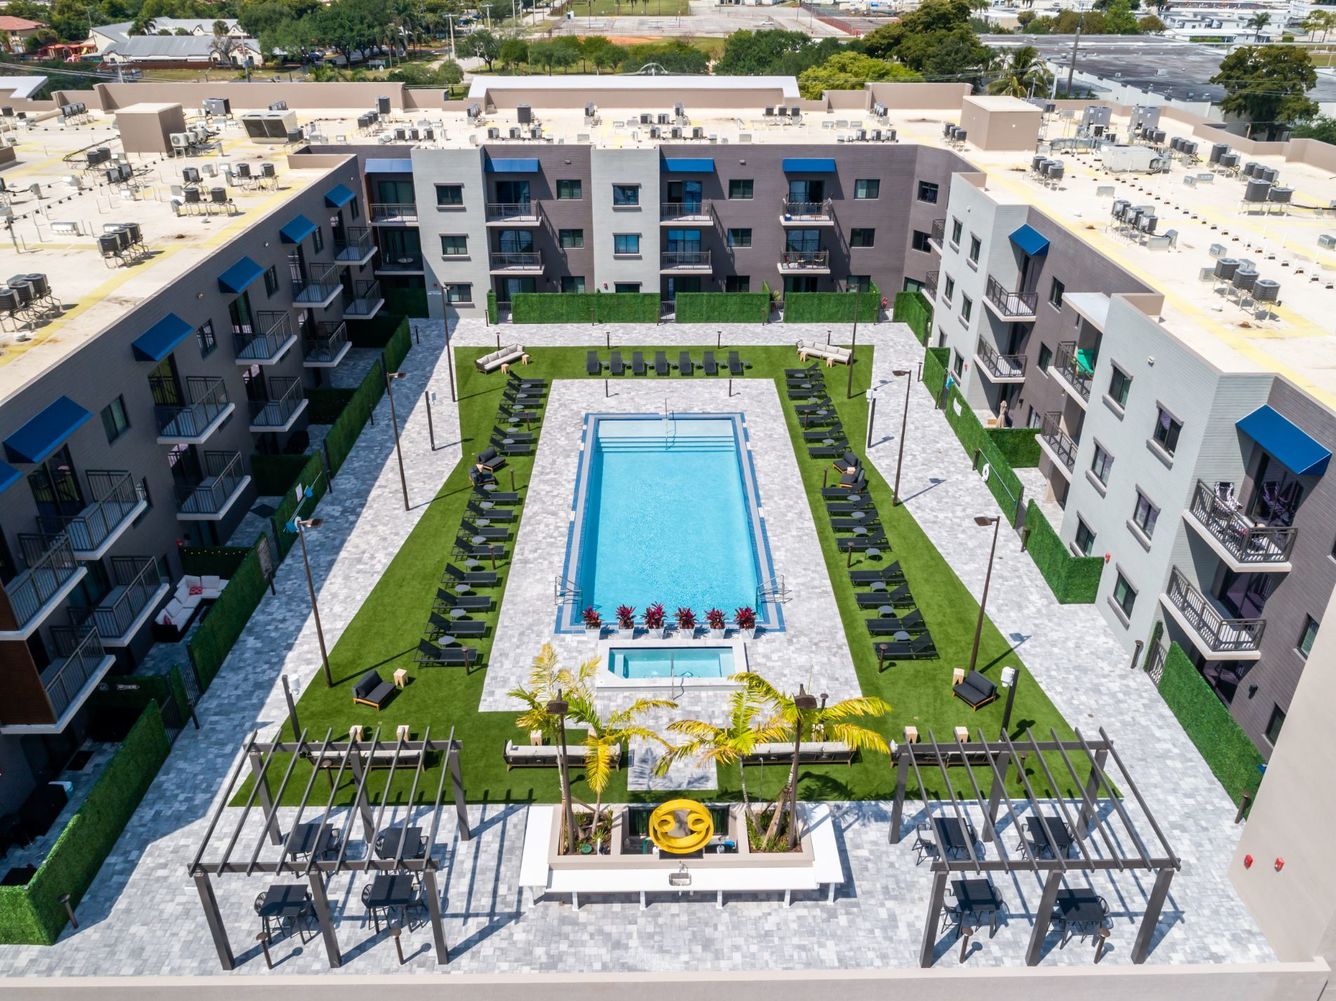 Newly Constructed 201-Unit Zona Village Apartment Community in South Florida Receives $67 Million in Financing